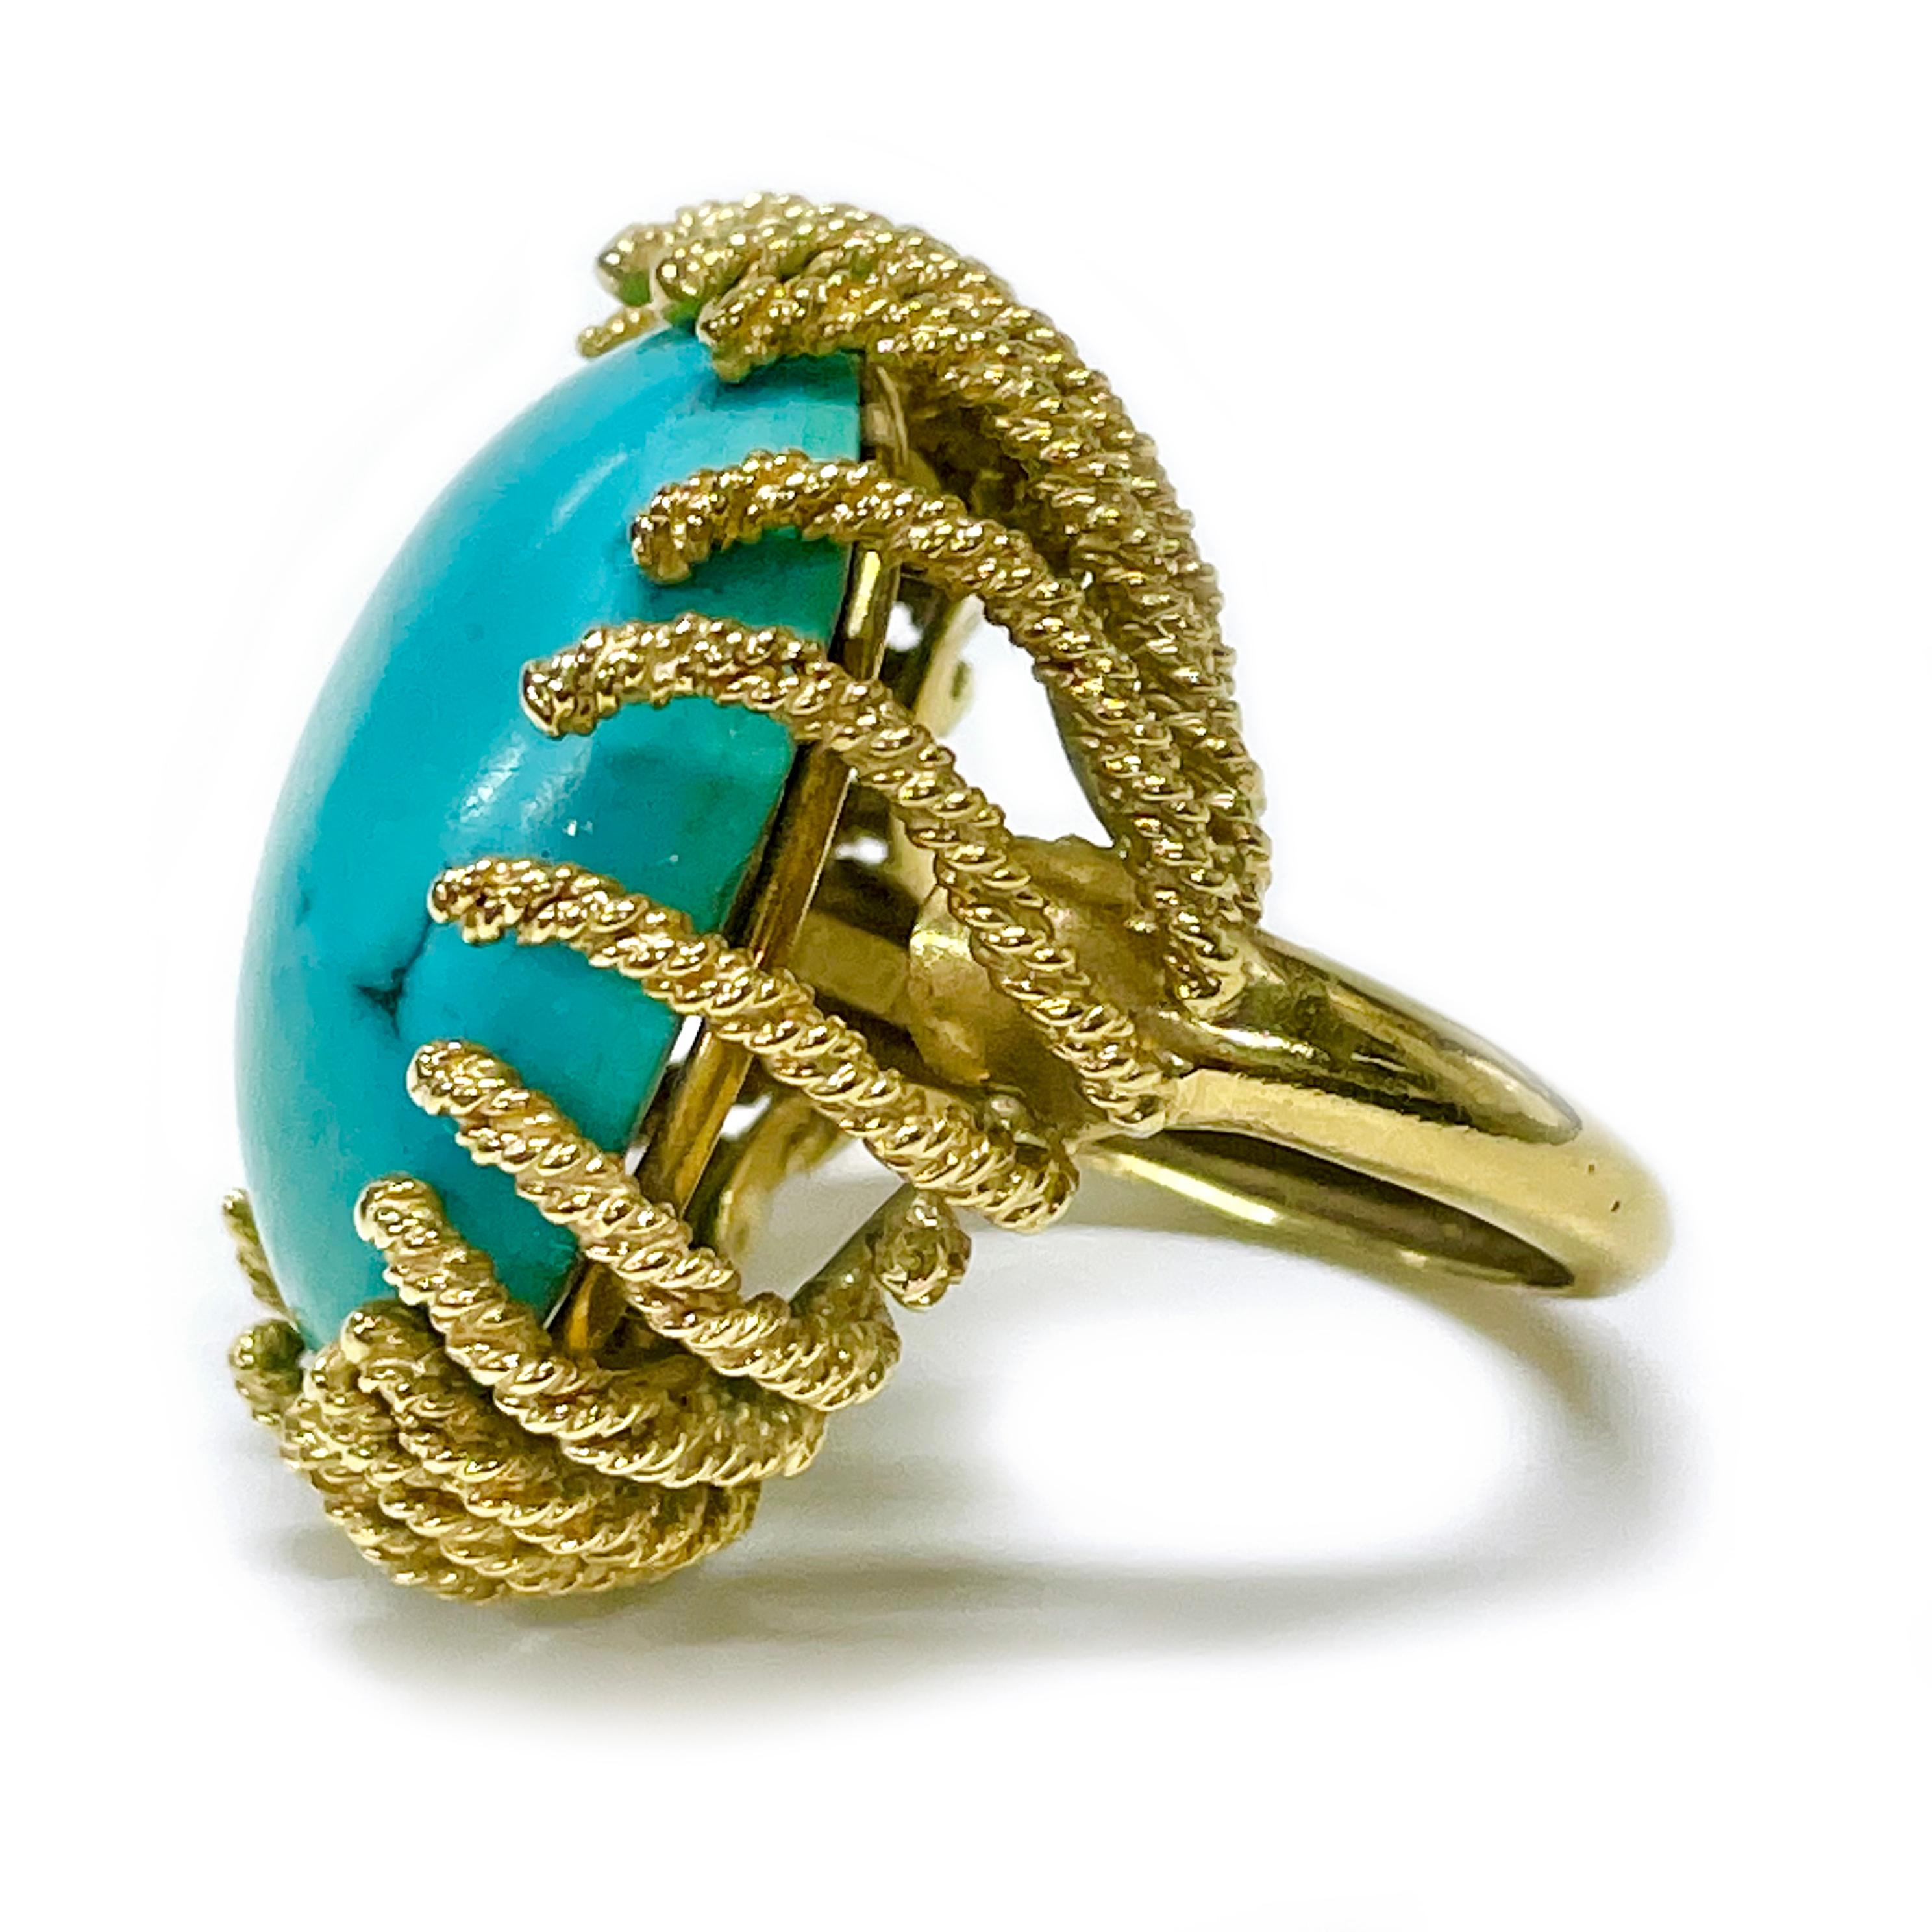 18 Karat Yellow Gold Twisted Wire Turquoise Ring. A true statement ring with twenty-two twisted gold wire prongs (one broken, visible on the second photo) that cradle a 25 x 20mm Turquoise cabochon. Stamped inside the band of the ring is WEBB18K.